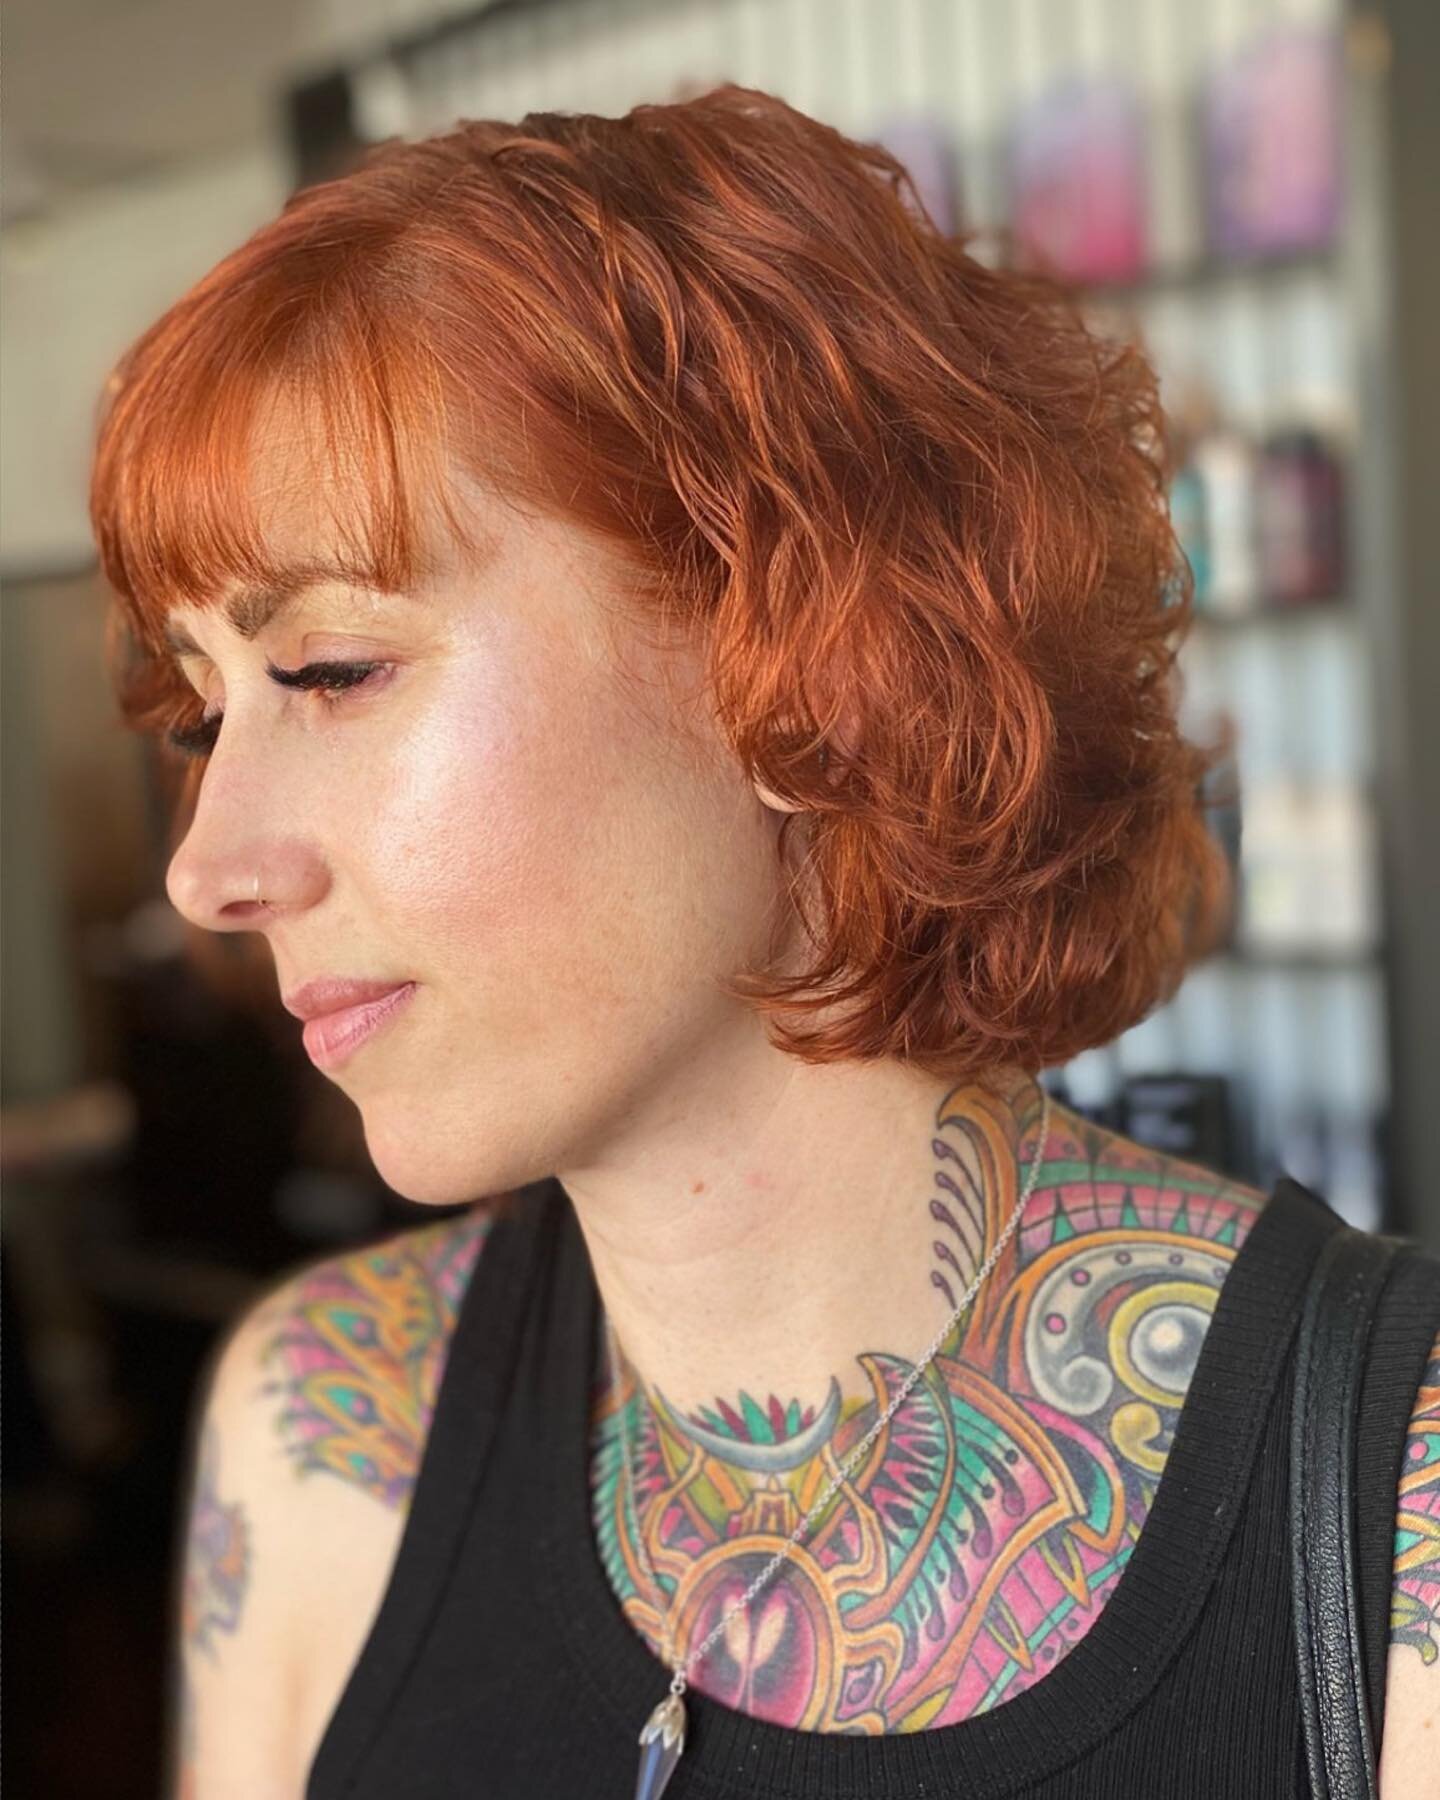 Captivating copper done by the amazing Ange, it&rsquo;s giving us Autumn vibes🍁🍂😍 

@lorealpro 
@ghdhair 
@redken 

 #hairgoals #newlook #shorthair #makeover #autumn #copper #burgundyhair #curlyhair #hairofinstagram #hairstylist #picoftheday #inst